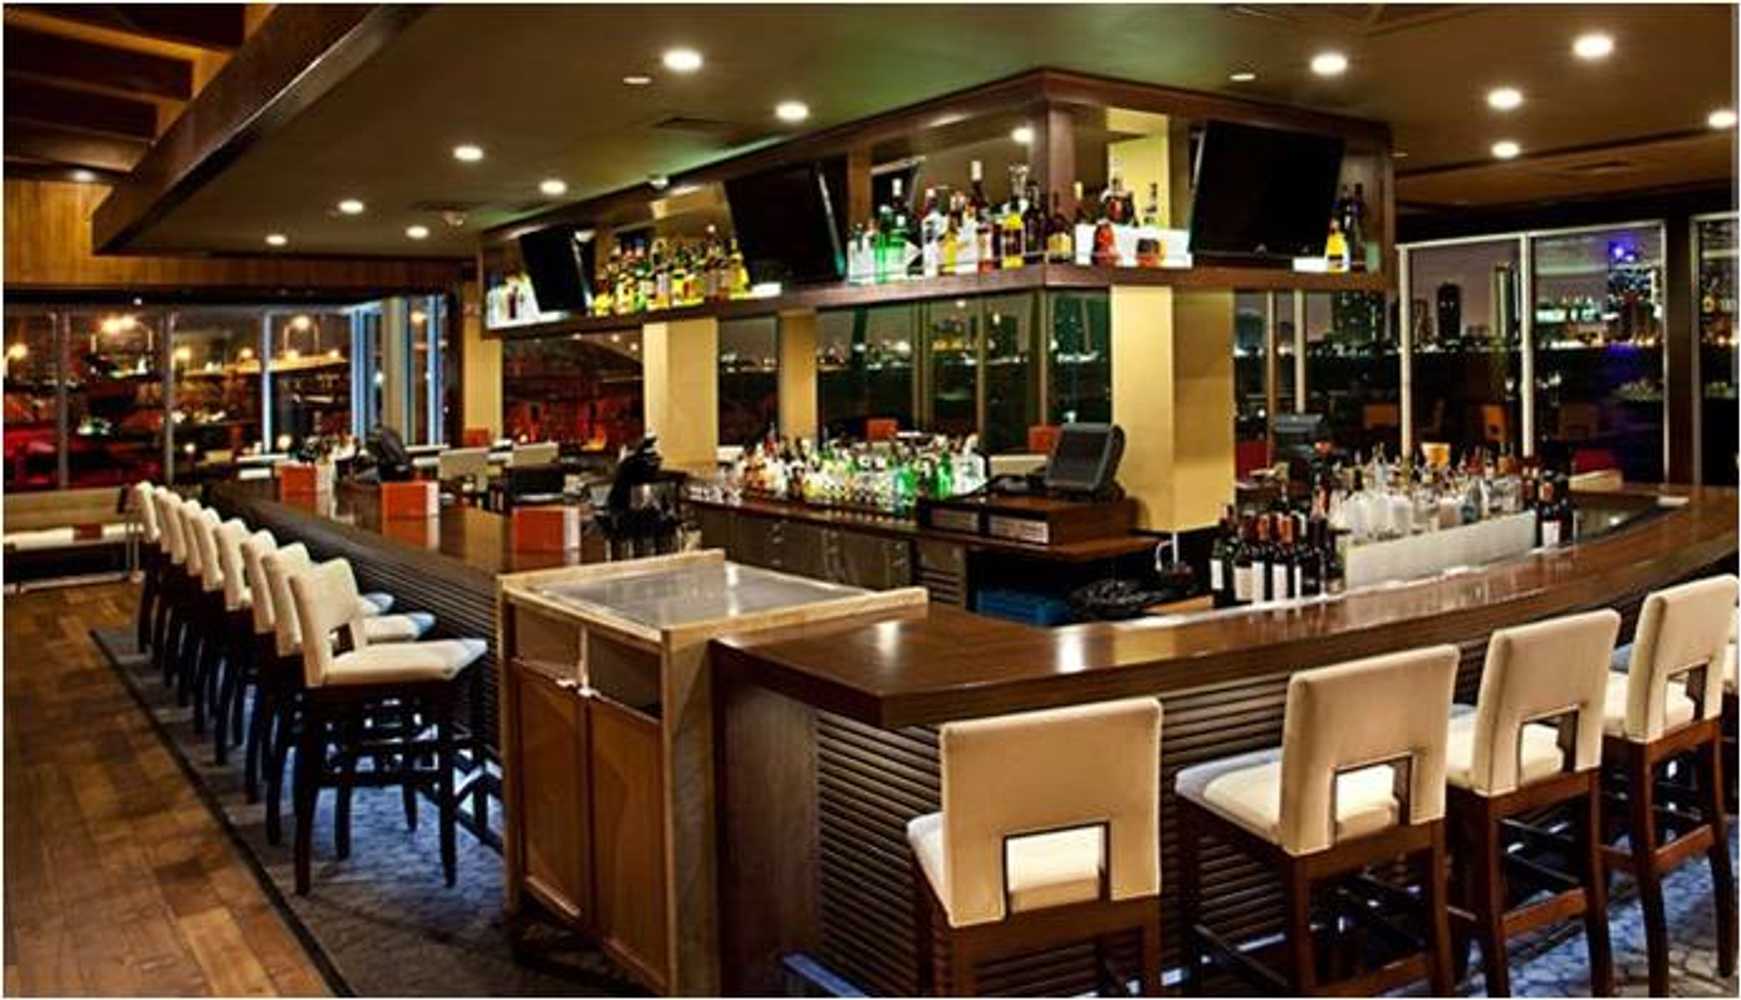 U.S. Construction Corp. - The Rusty Pelican Restaurant, Lounge and Special Events Facility